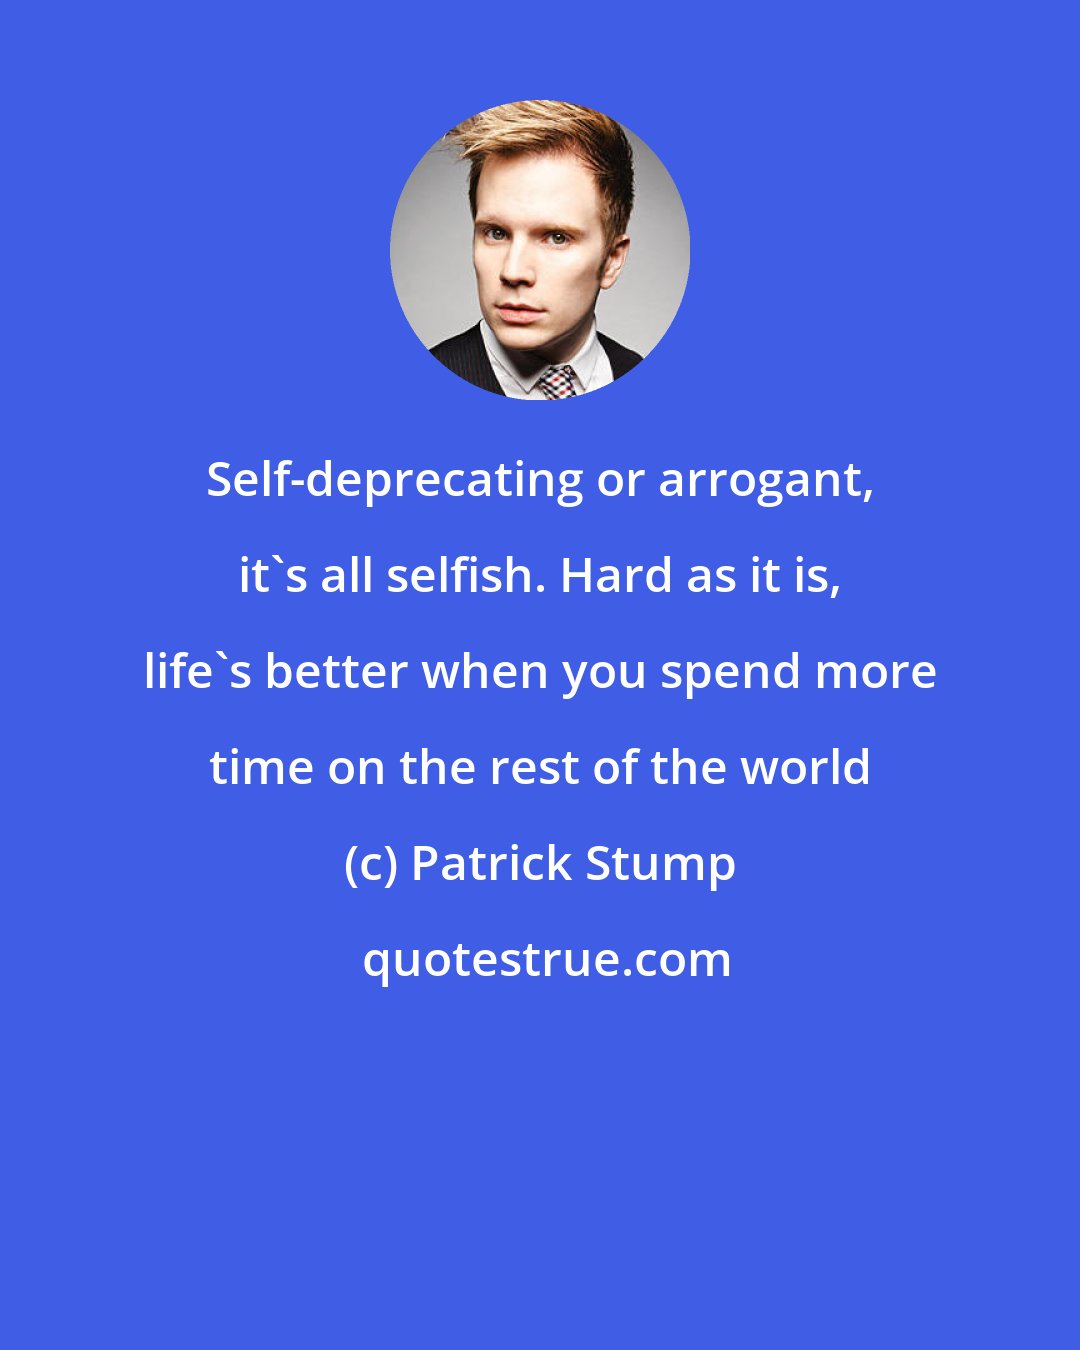 Patrick Stump: Self-deprecating or arrogant, it's all selfish. Hard as it is, life's better when you spend more time on the rest of the world